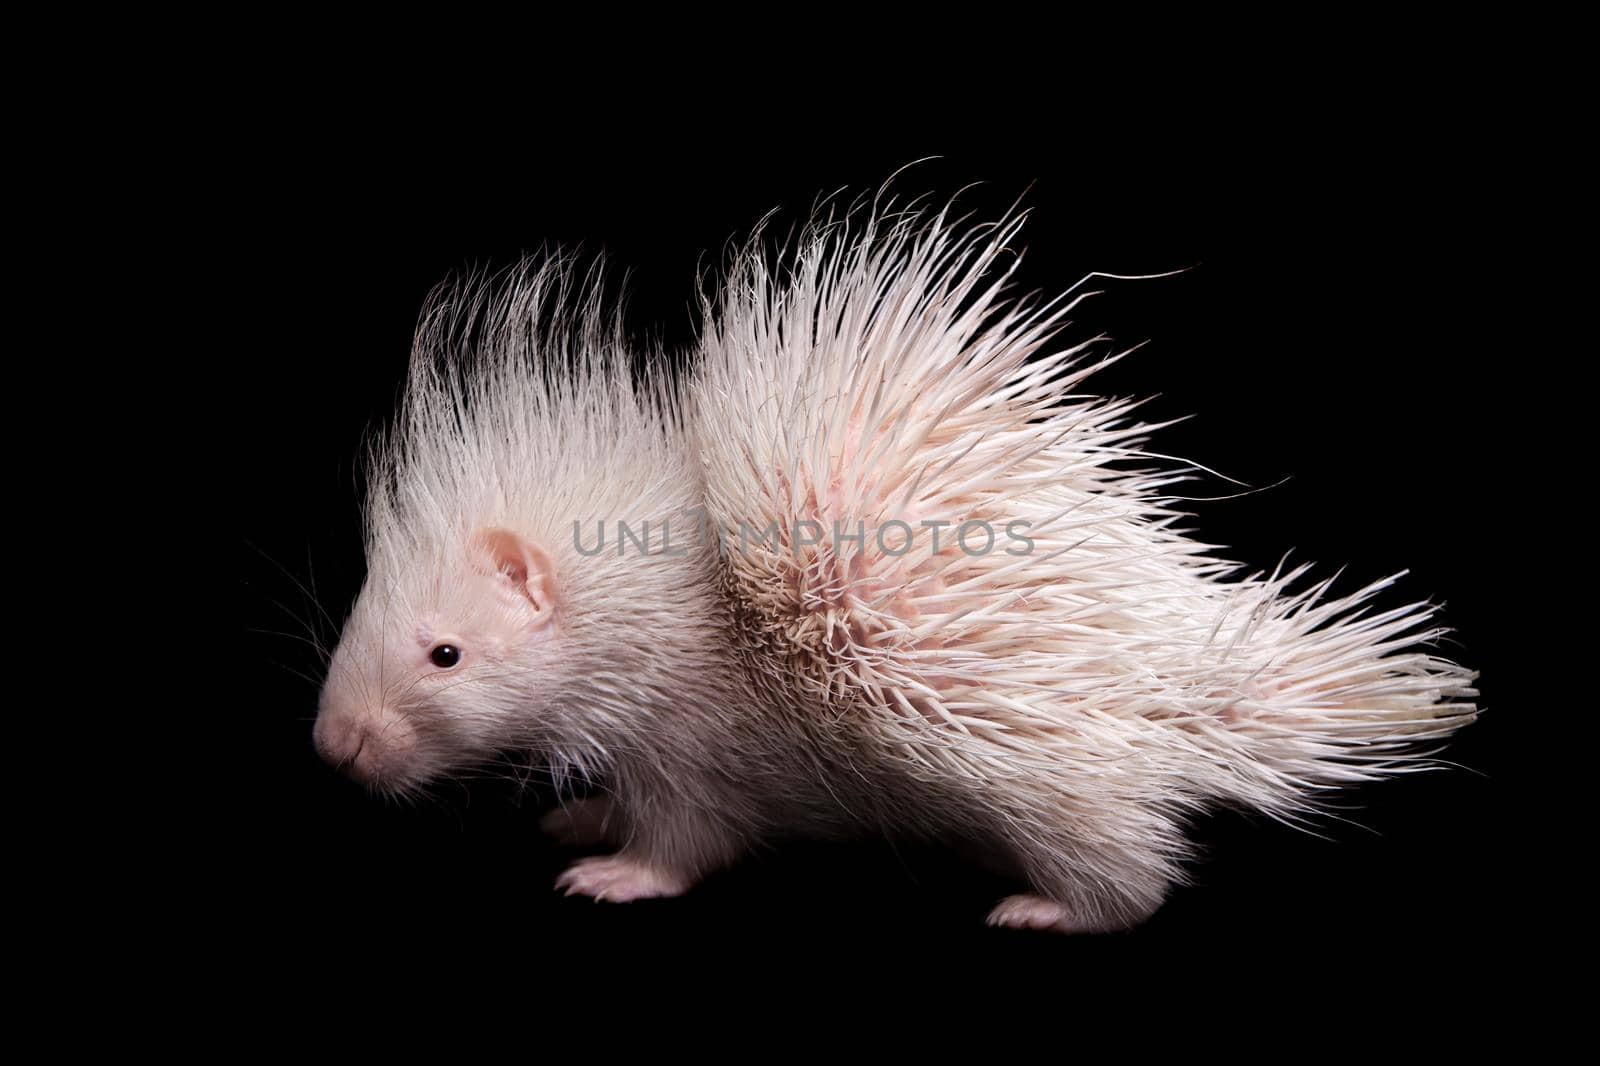 Albino indian crested Porcupine baby, Hystrix indica, isolated on black background